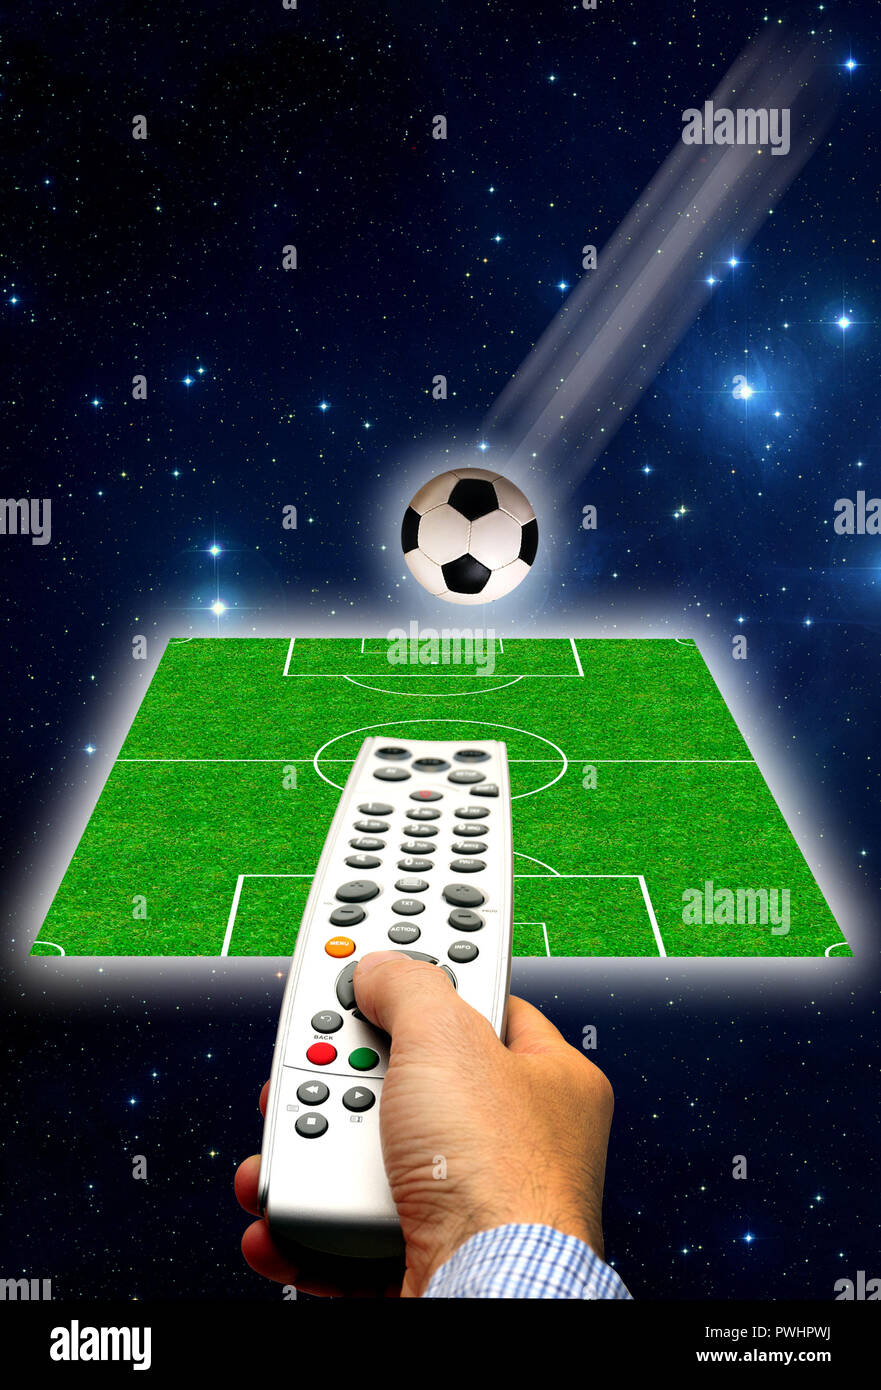 watching soccer on television concept Stock Photo